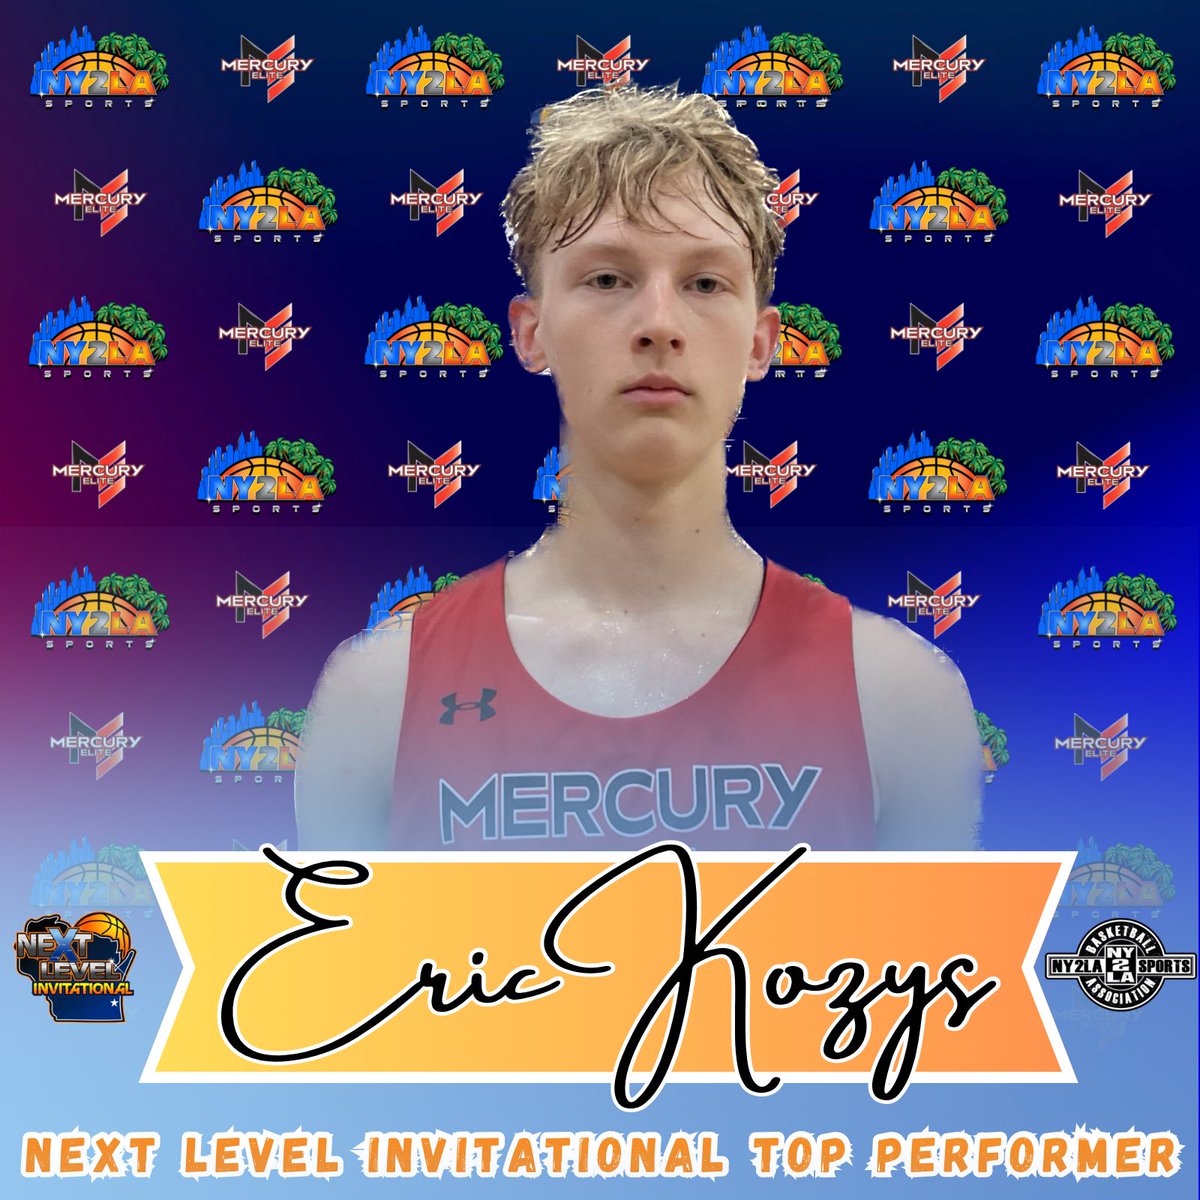 Strong spring for Eric Kozys continues here this weekend. The 2025 6’2 guard scored 19 points, hitting four threes. @MercuryEliteAAU @ny2lasports @ny2labasketball